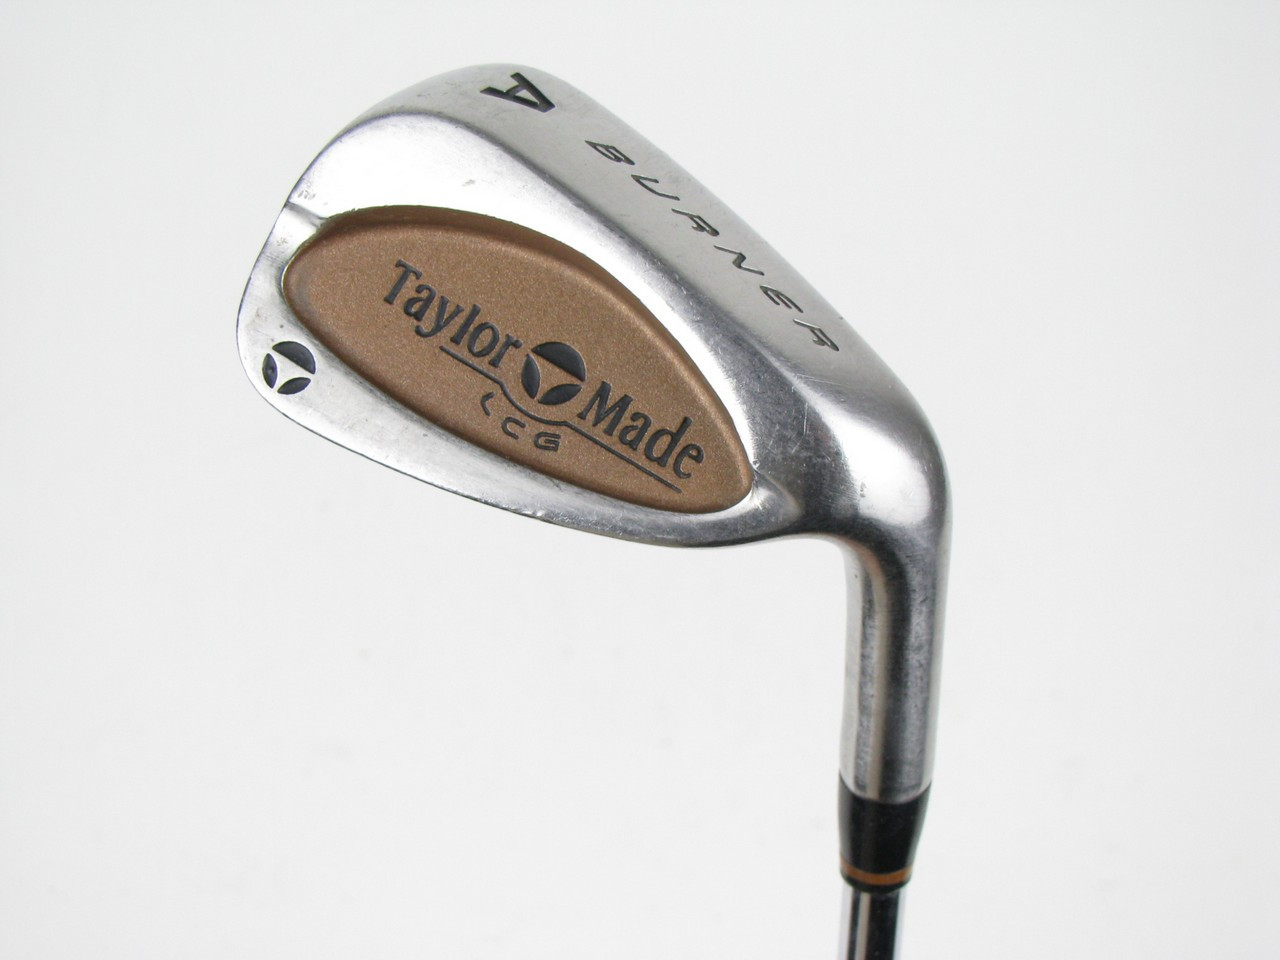 taylormade tour burner approach wedge